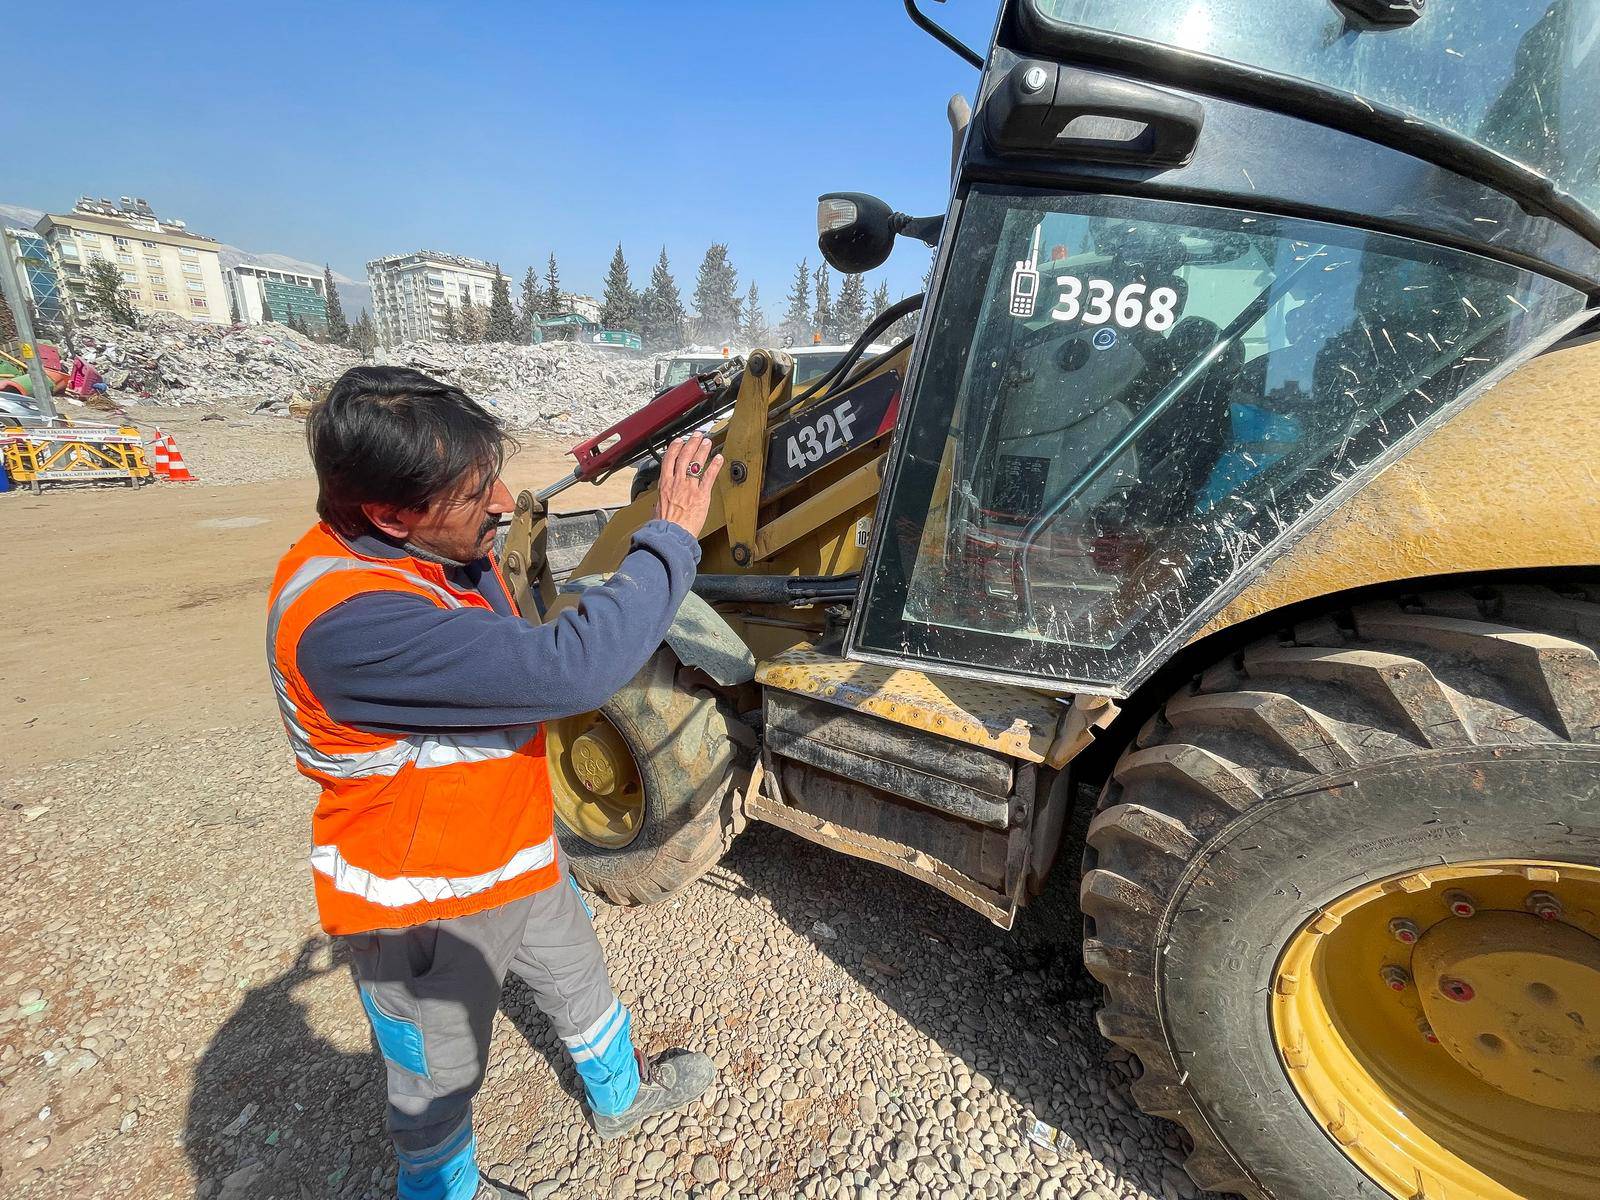 Akin Bozkurt operates a bulldozer at the site of collapsed buildings, taking part in the efforts to find bodies under rubble, in the aftermath of the deadly earthquake, in Kahramanmaras